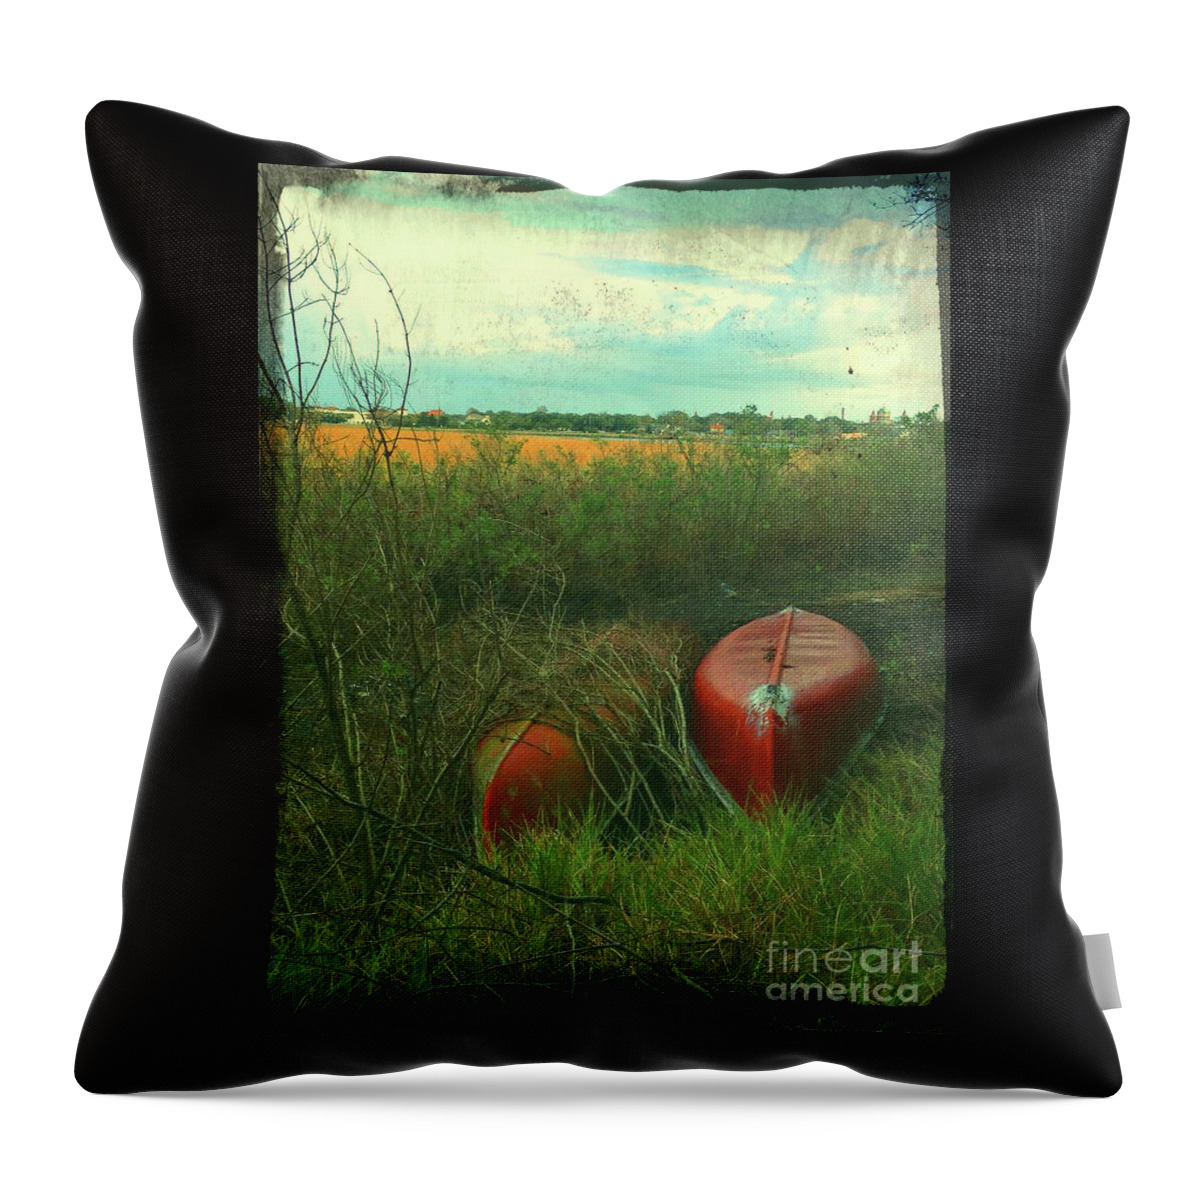 Boats Throw Pillow featuring the photograph Boats by Elizabeth Hoskinson